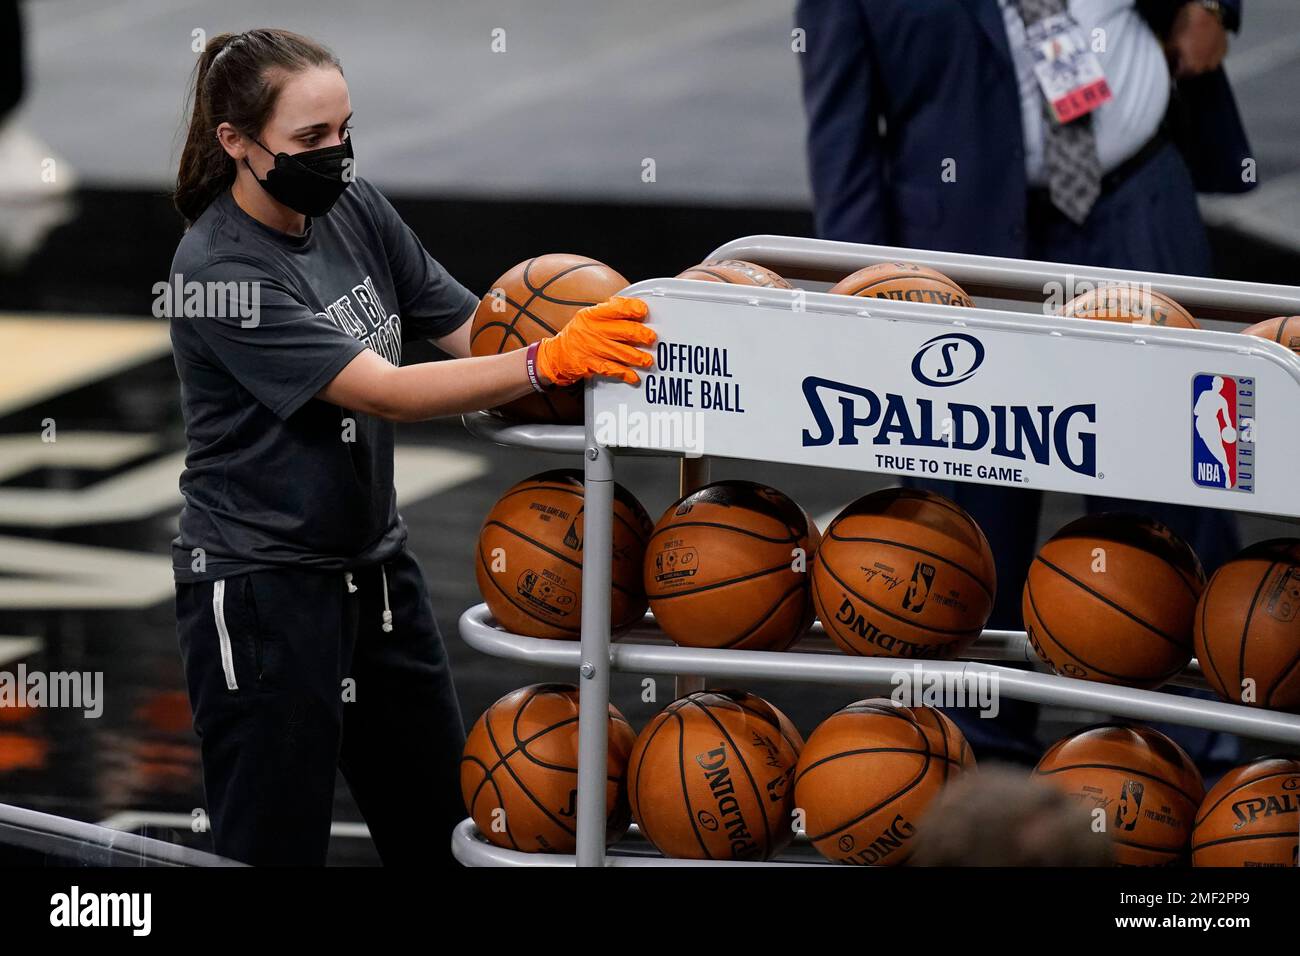 A San Antonio Spurs team attendant uses protective gear as she moves ball  off the court prior to an NBA basketball game between the San Antonio Spurs  and the New Orleans Pelicans